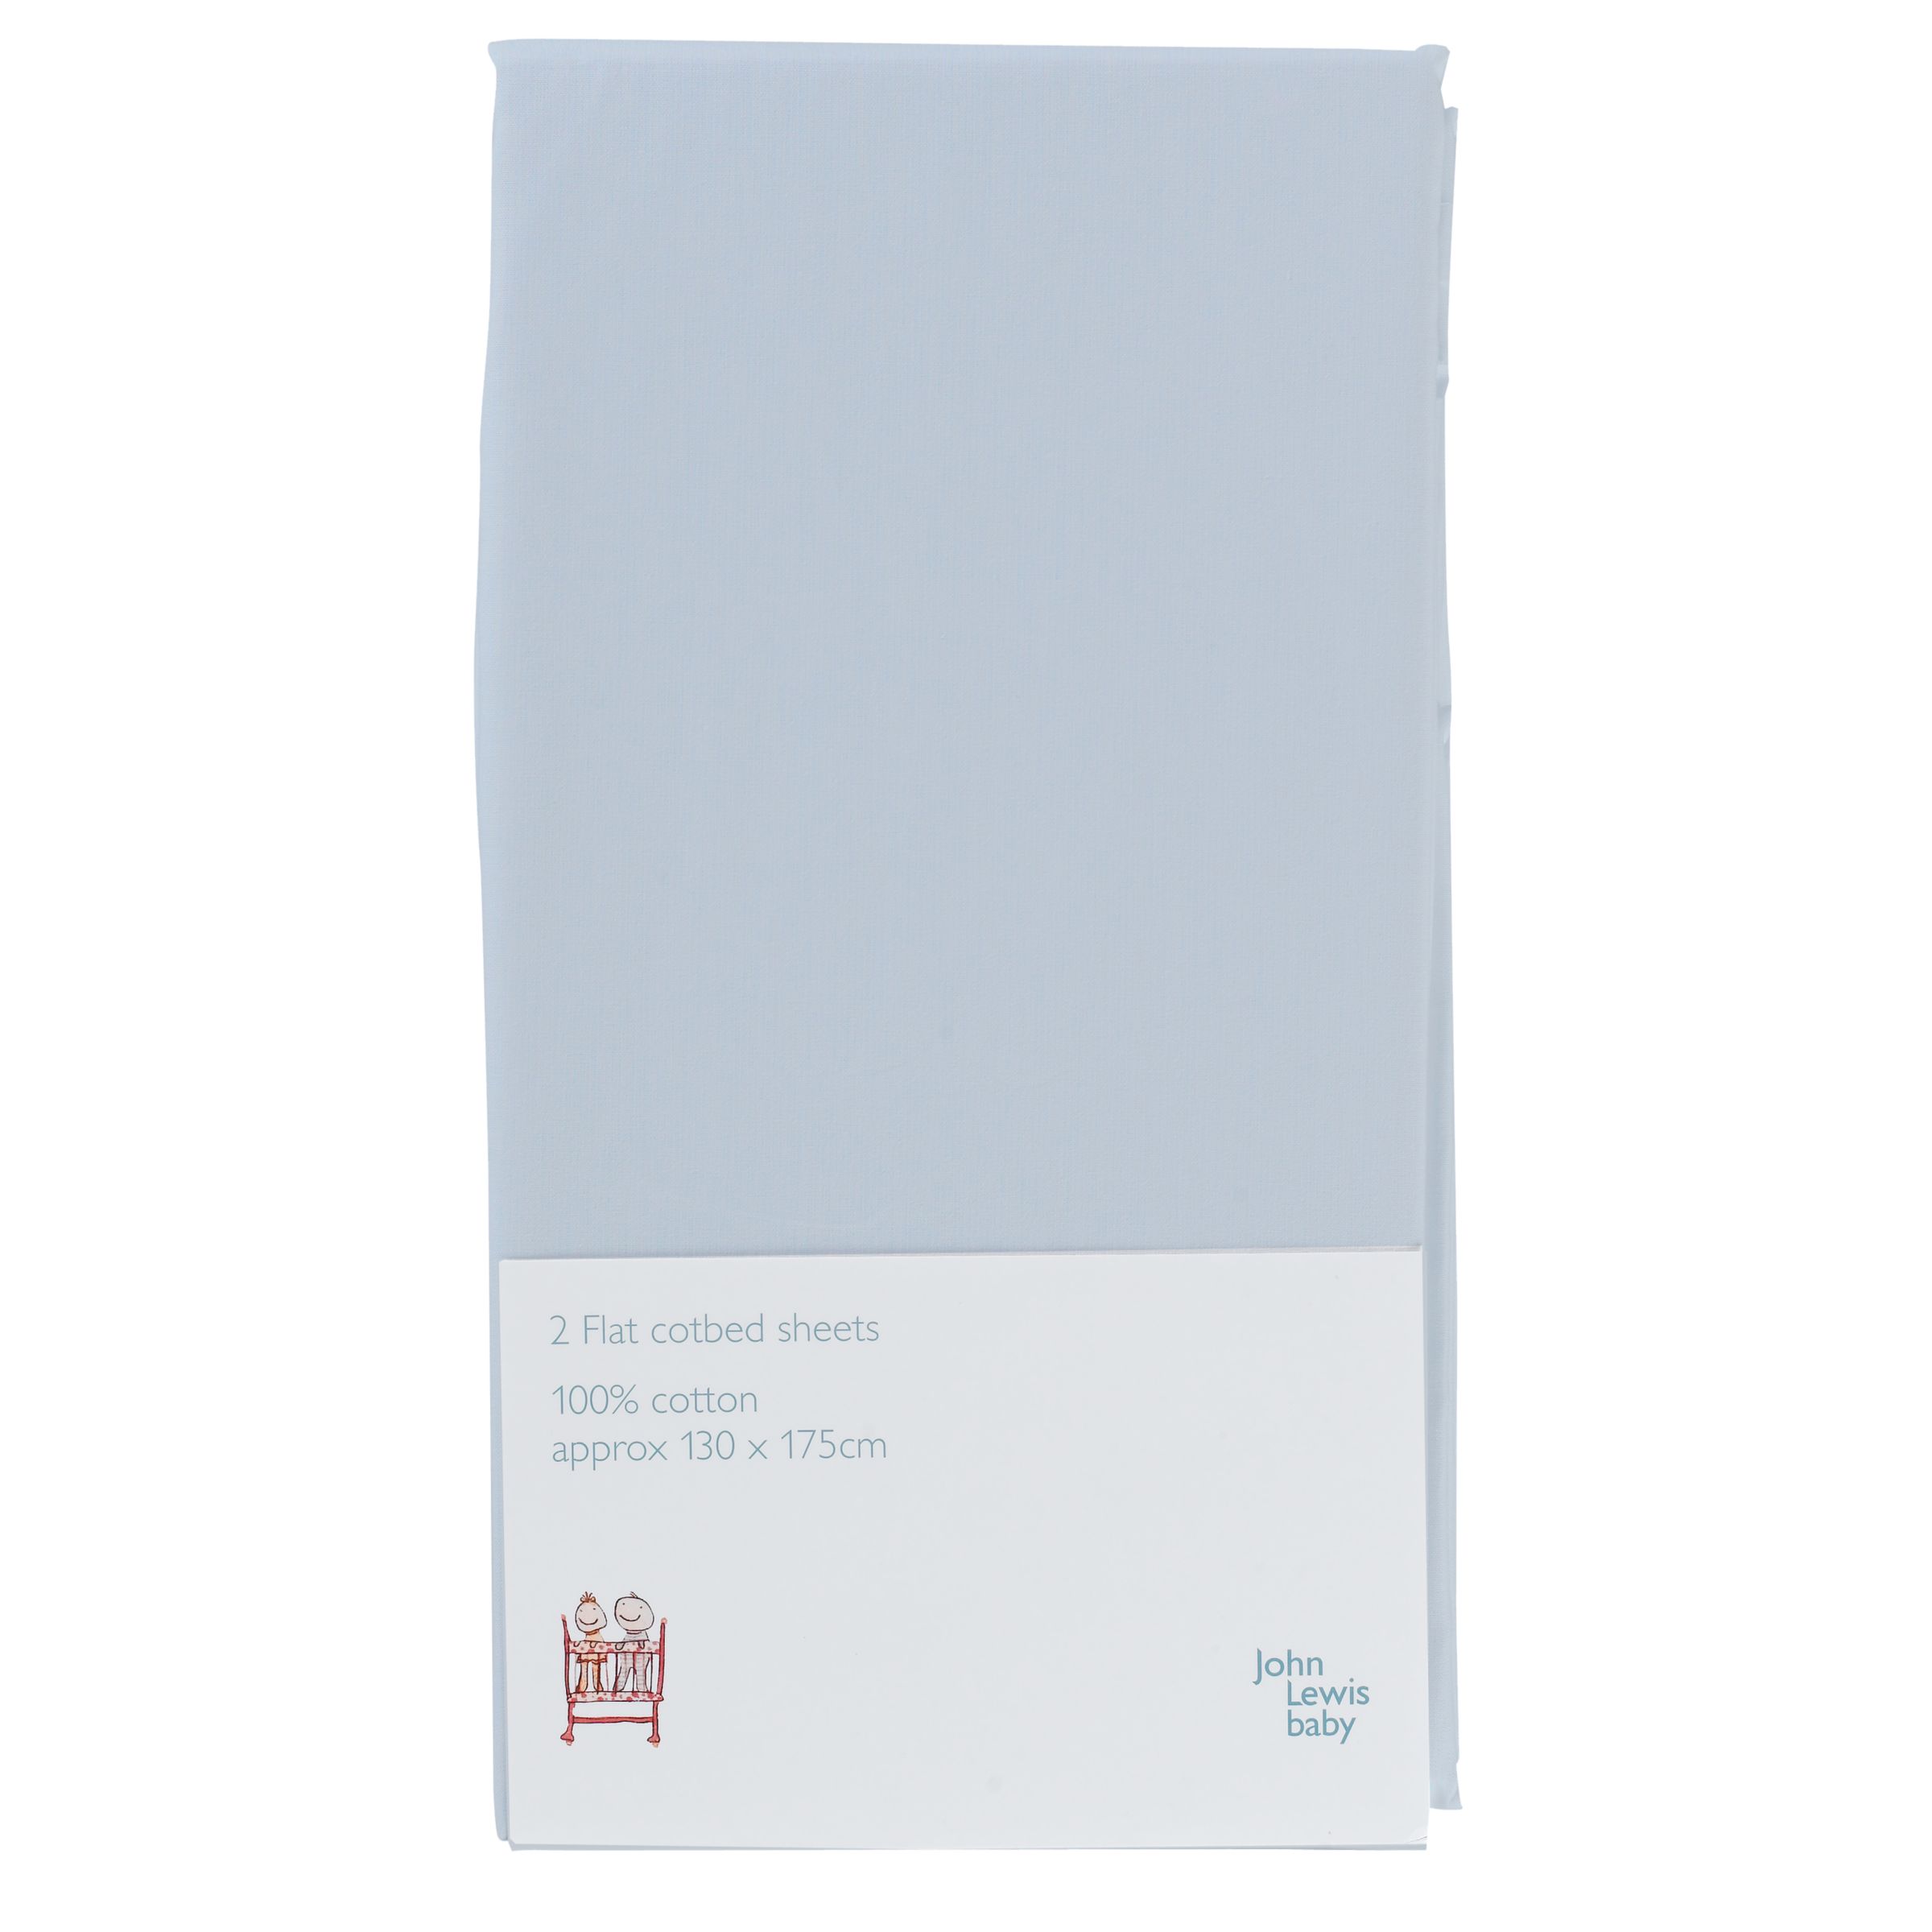 John Lewis Baby Flat Cotbed Sheet, Pack of 2, Sky